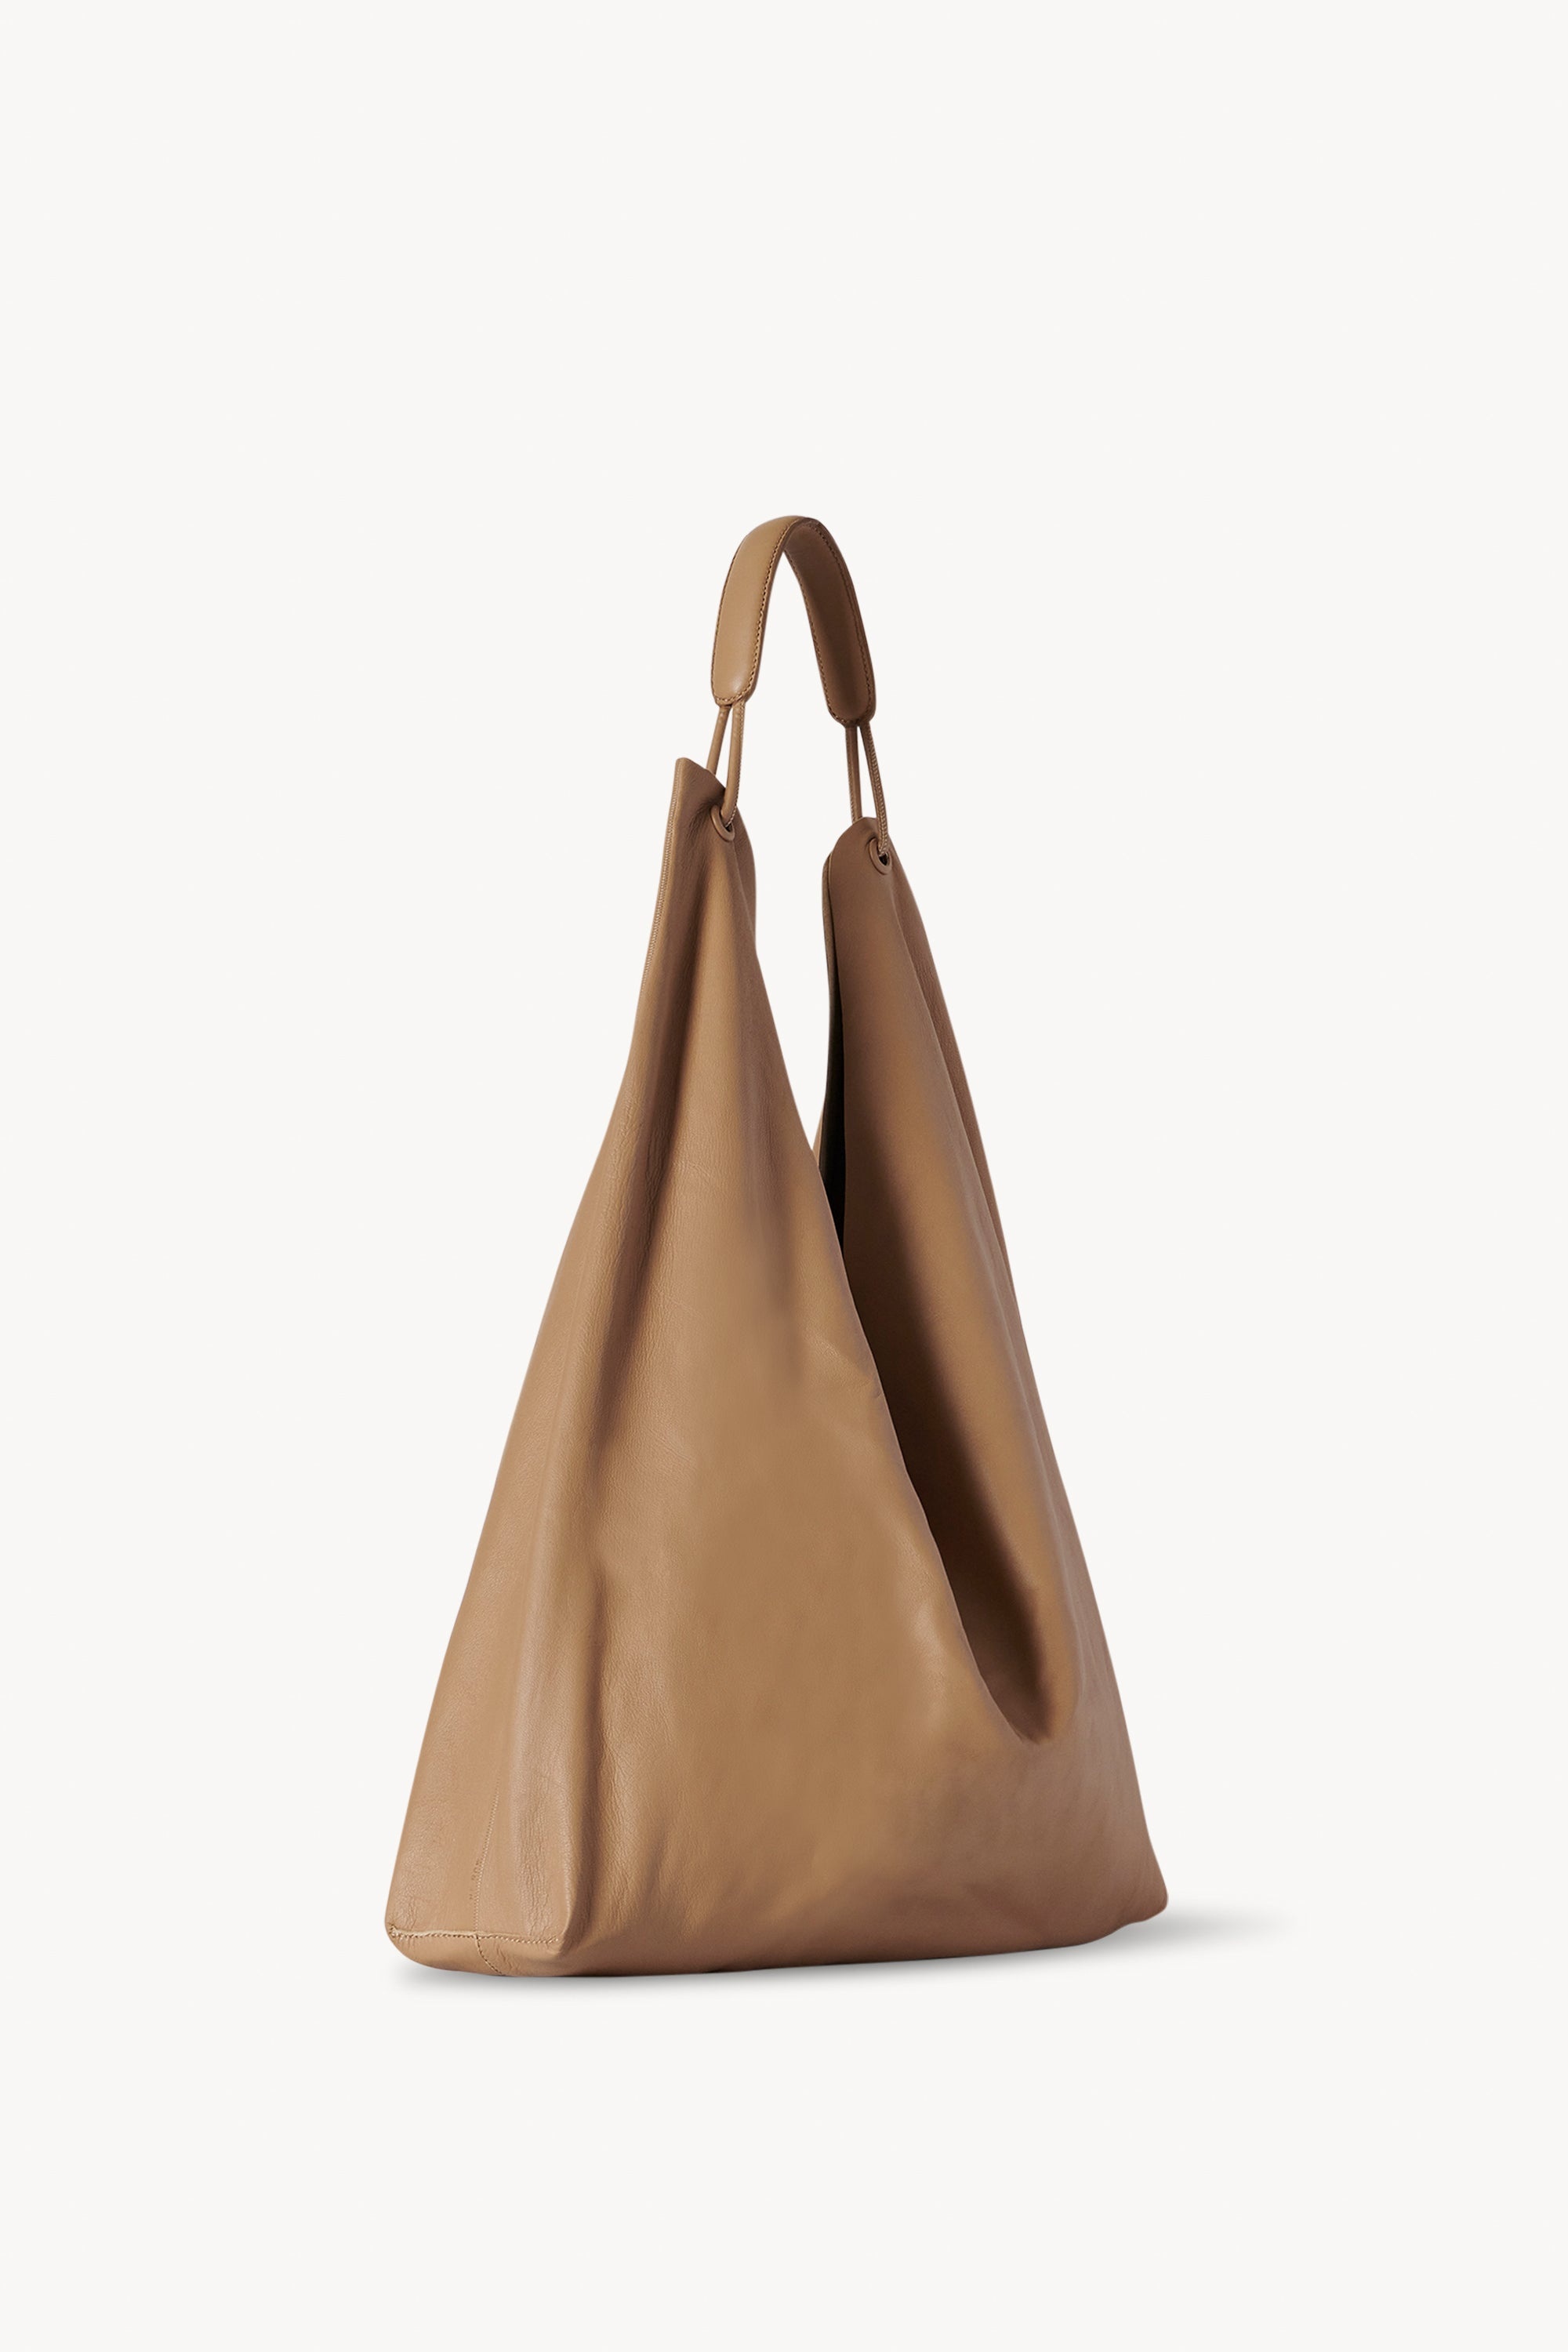 Bindle 3 Bag in Leather - 2